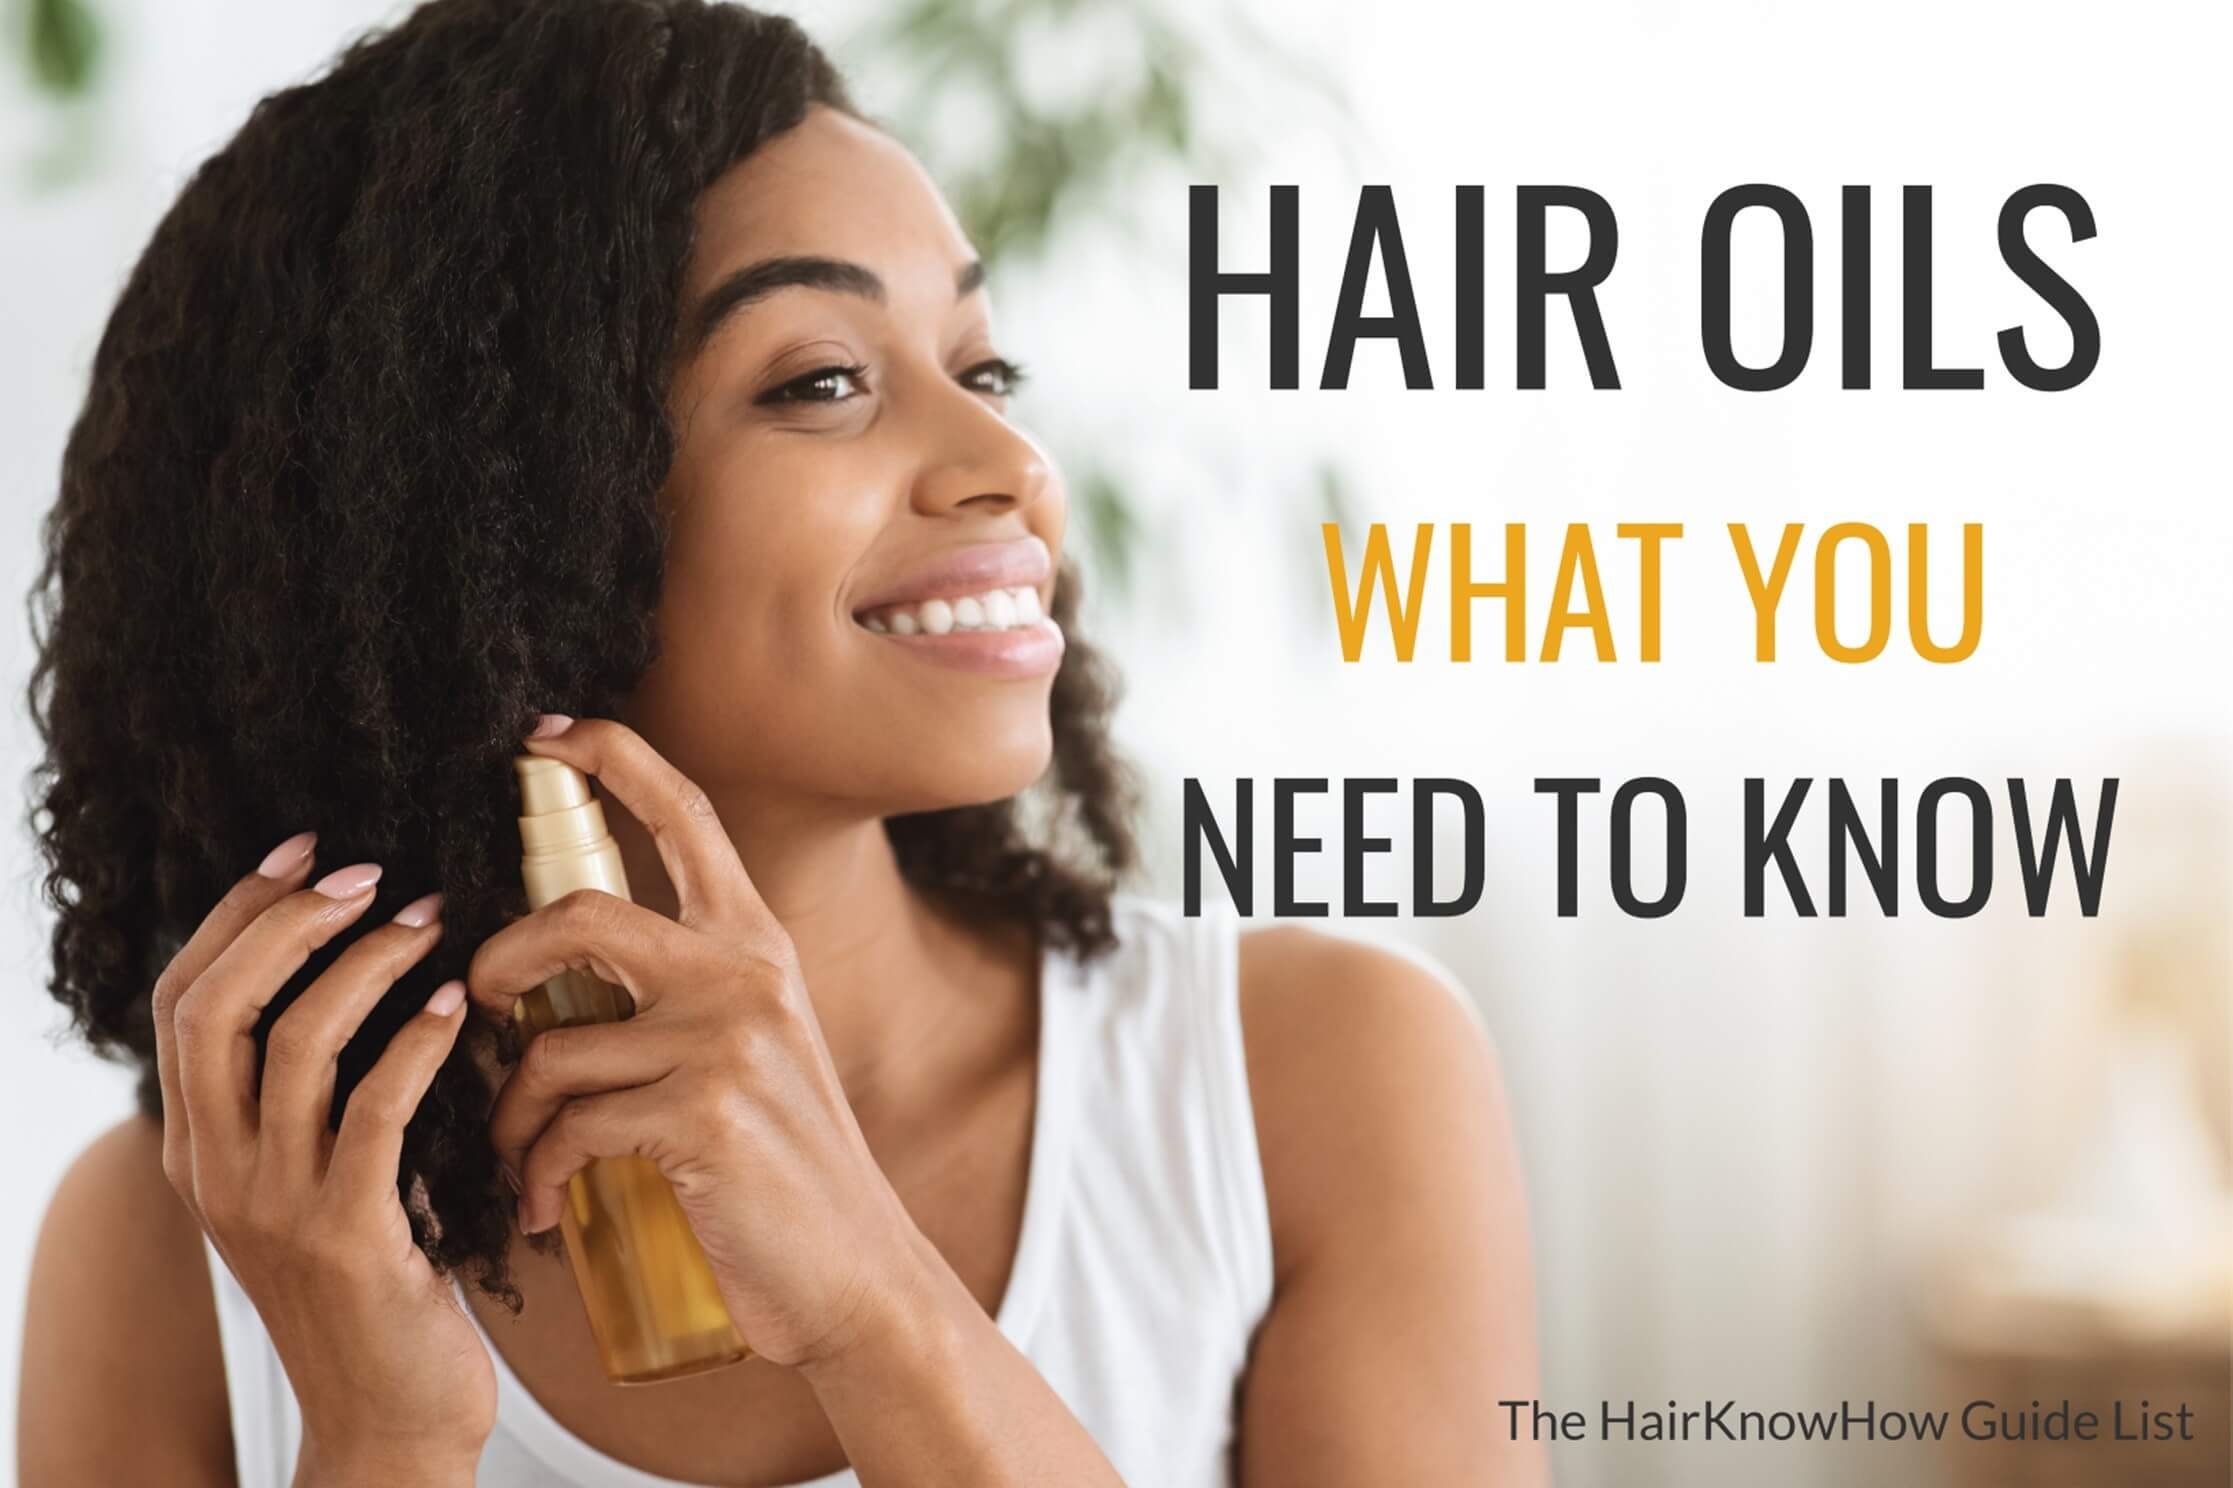 Hair Oils - What You Need To Know - Find Top Hair Oil Guides Here ...